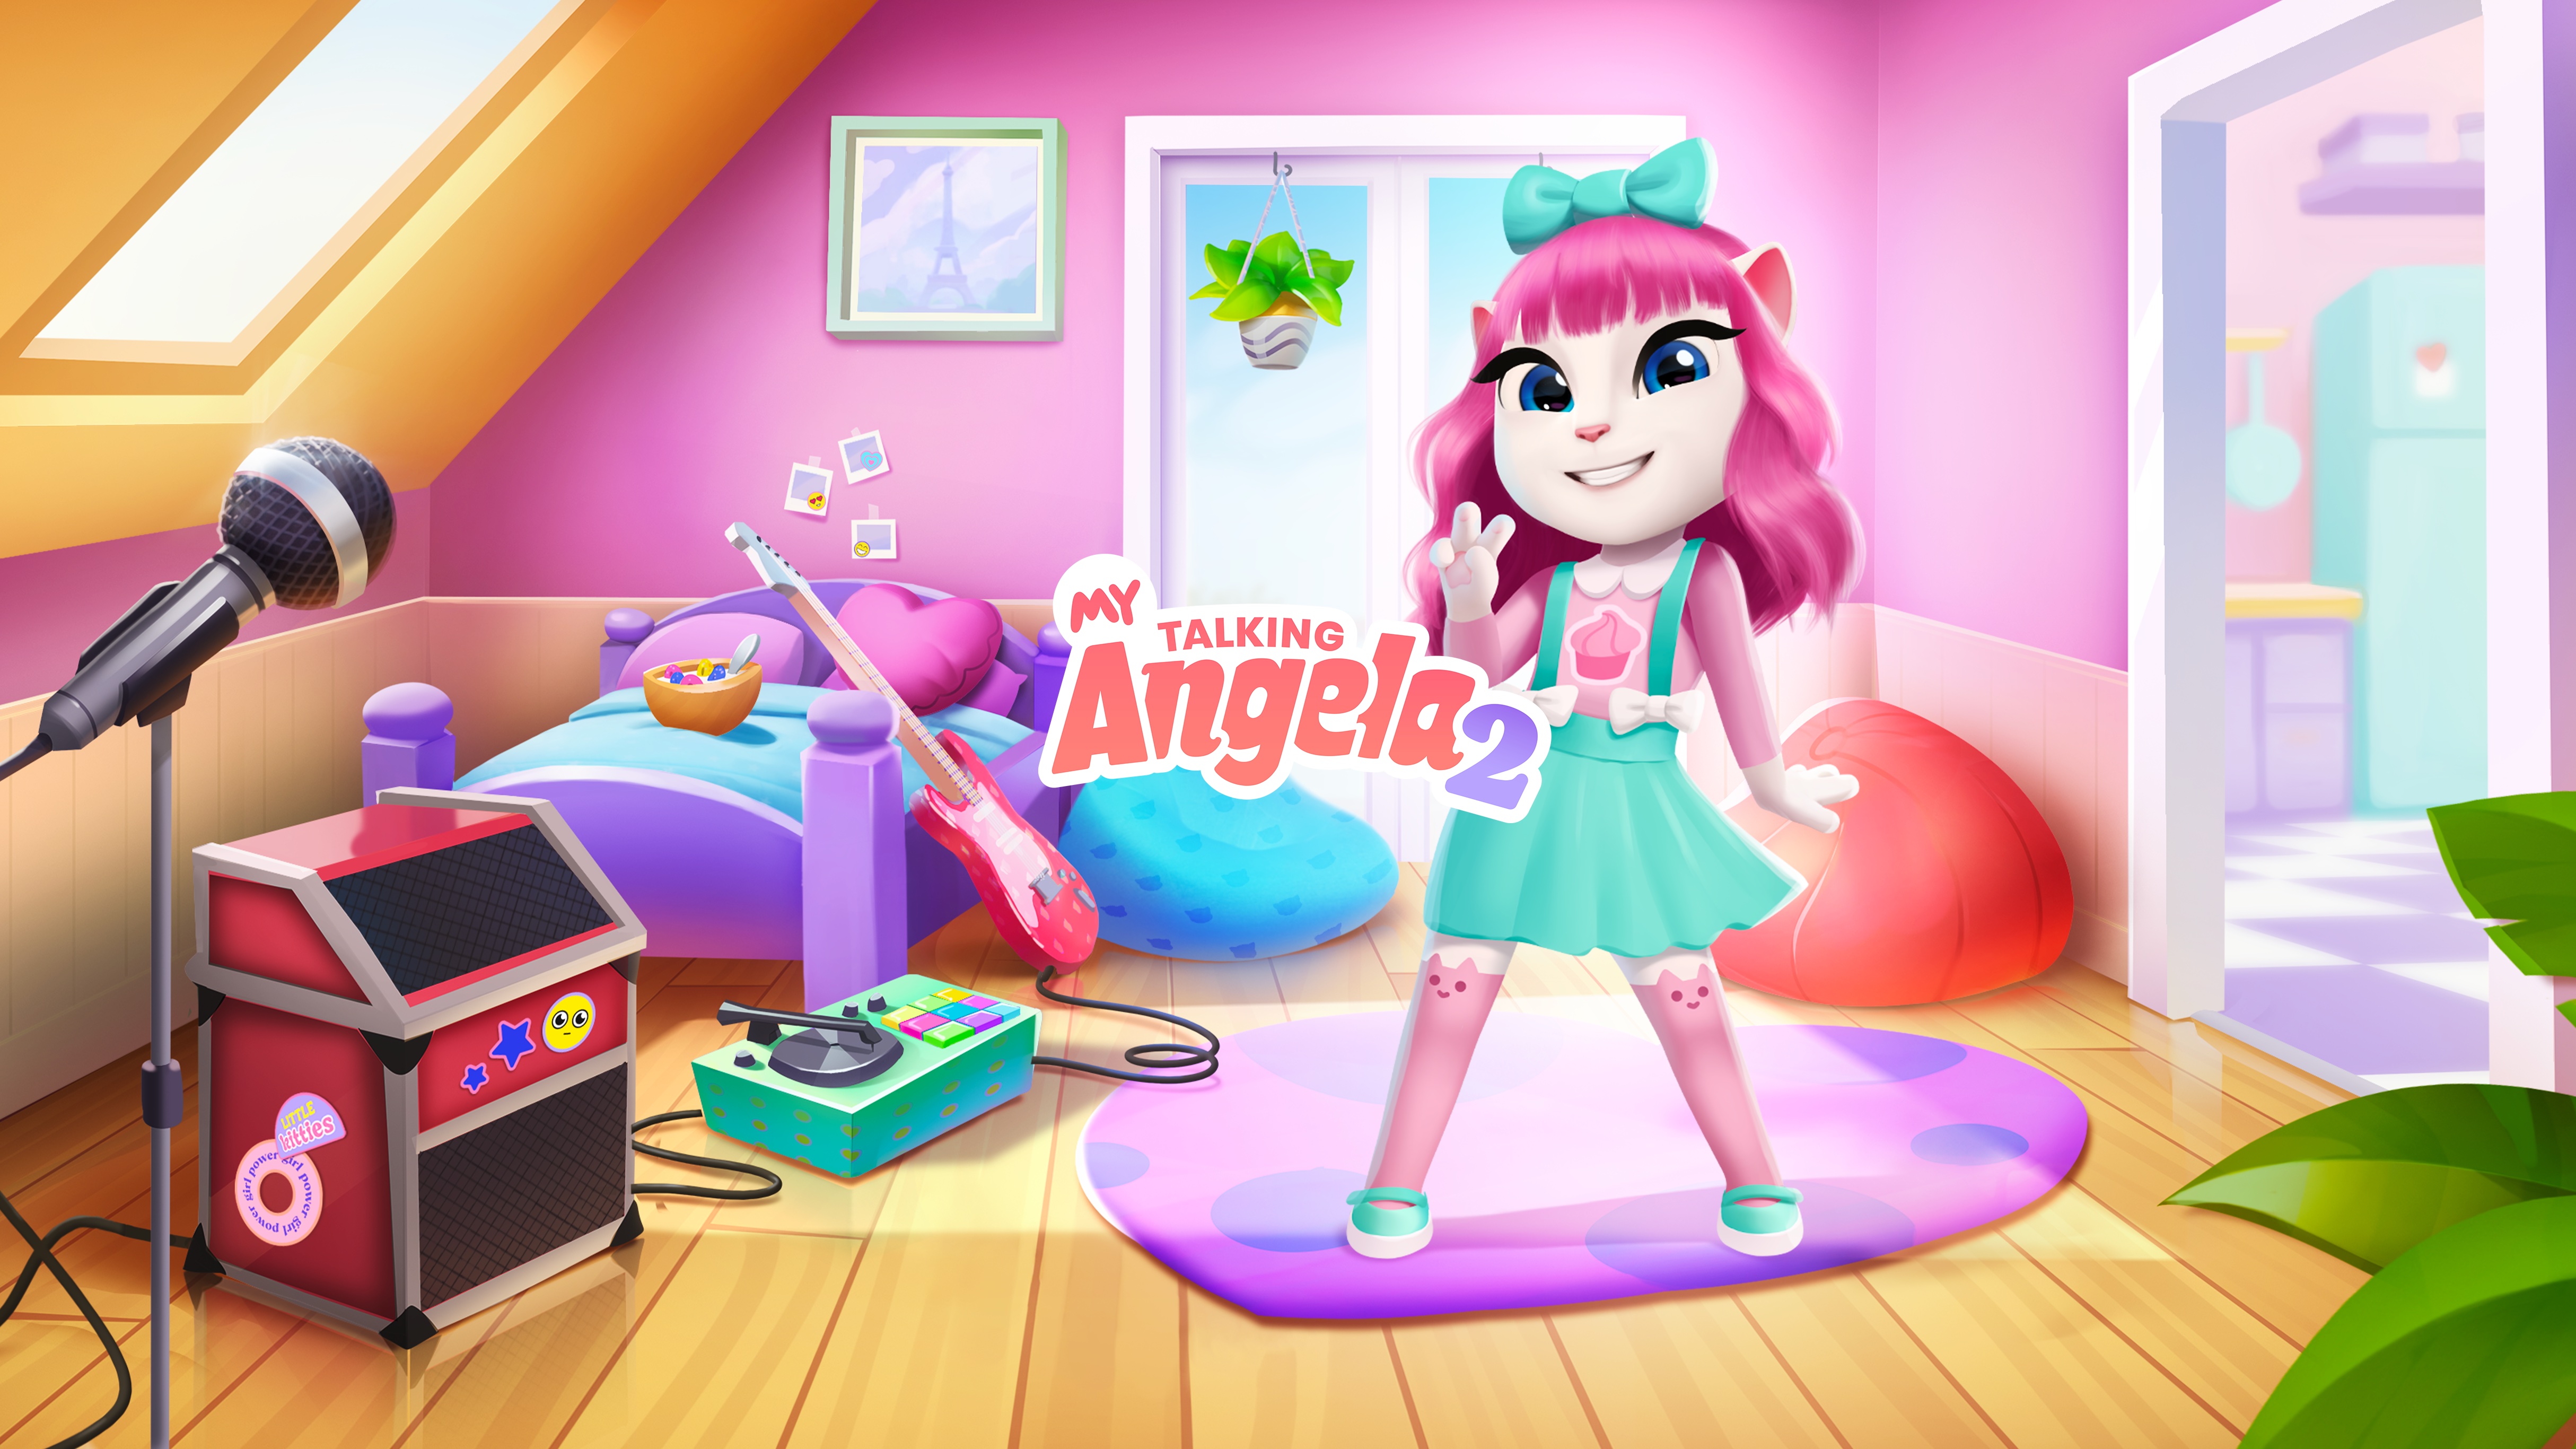 ‘My Talking Angela 2 ’ Is September’s First New Apple Arcade Game Out Now Alongside Big Updates for Many Notable Games